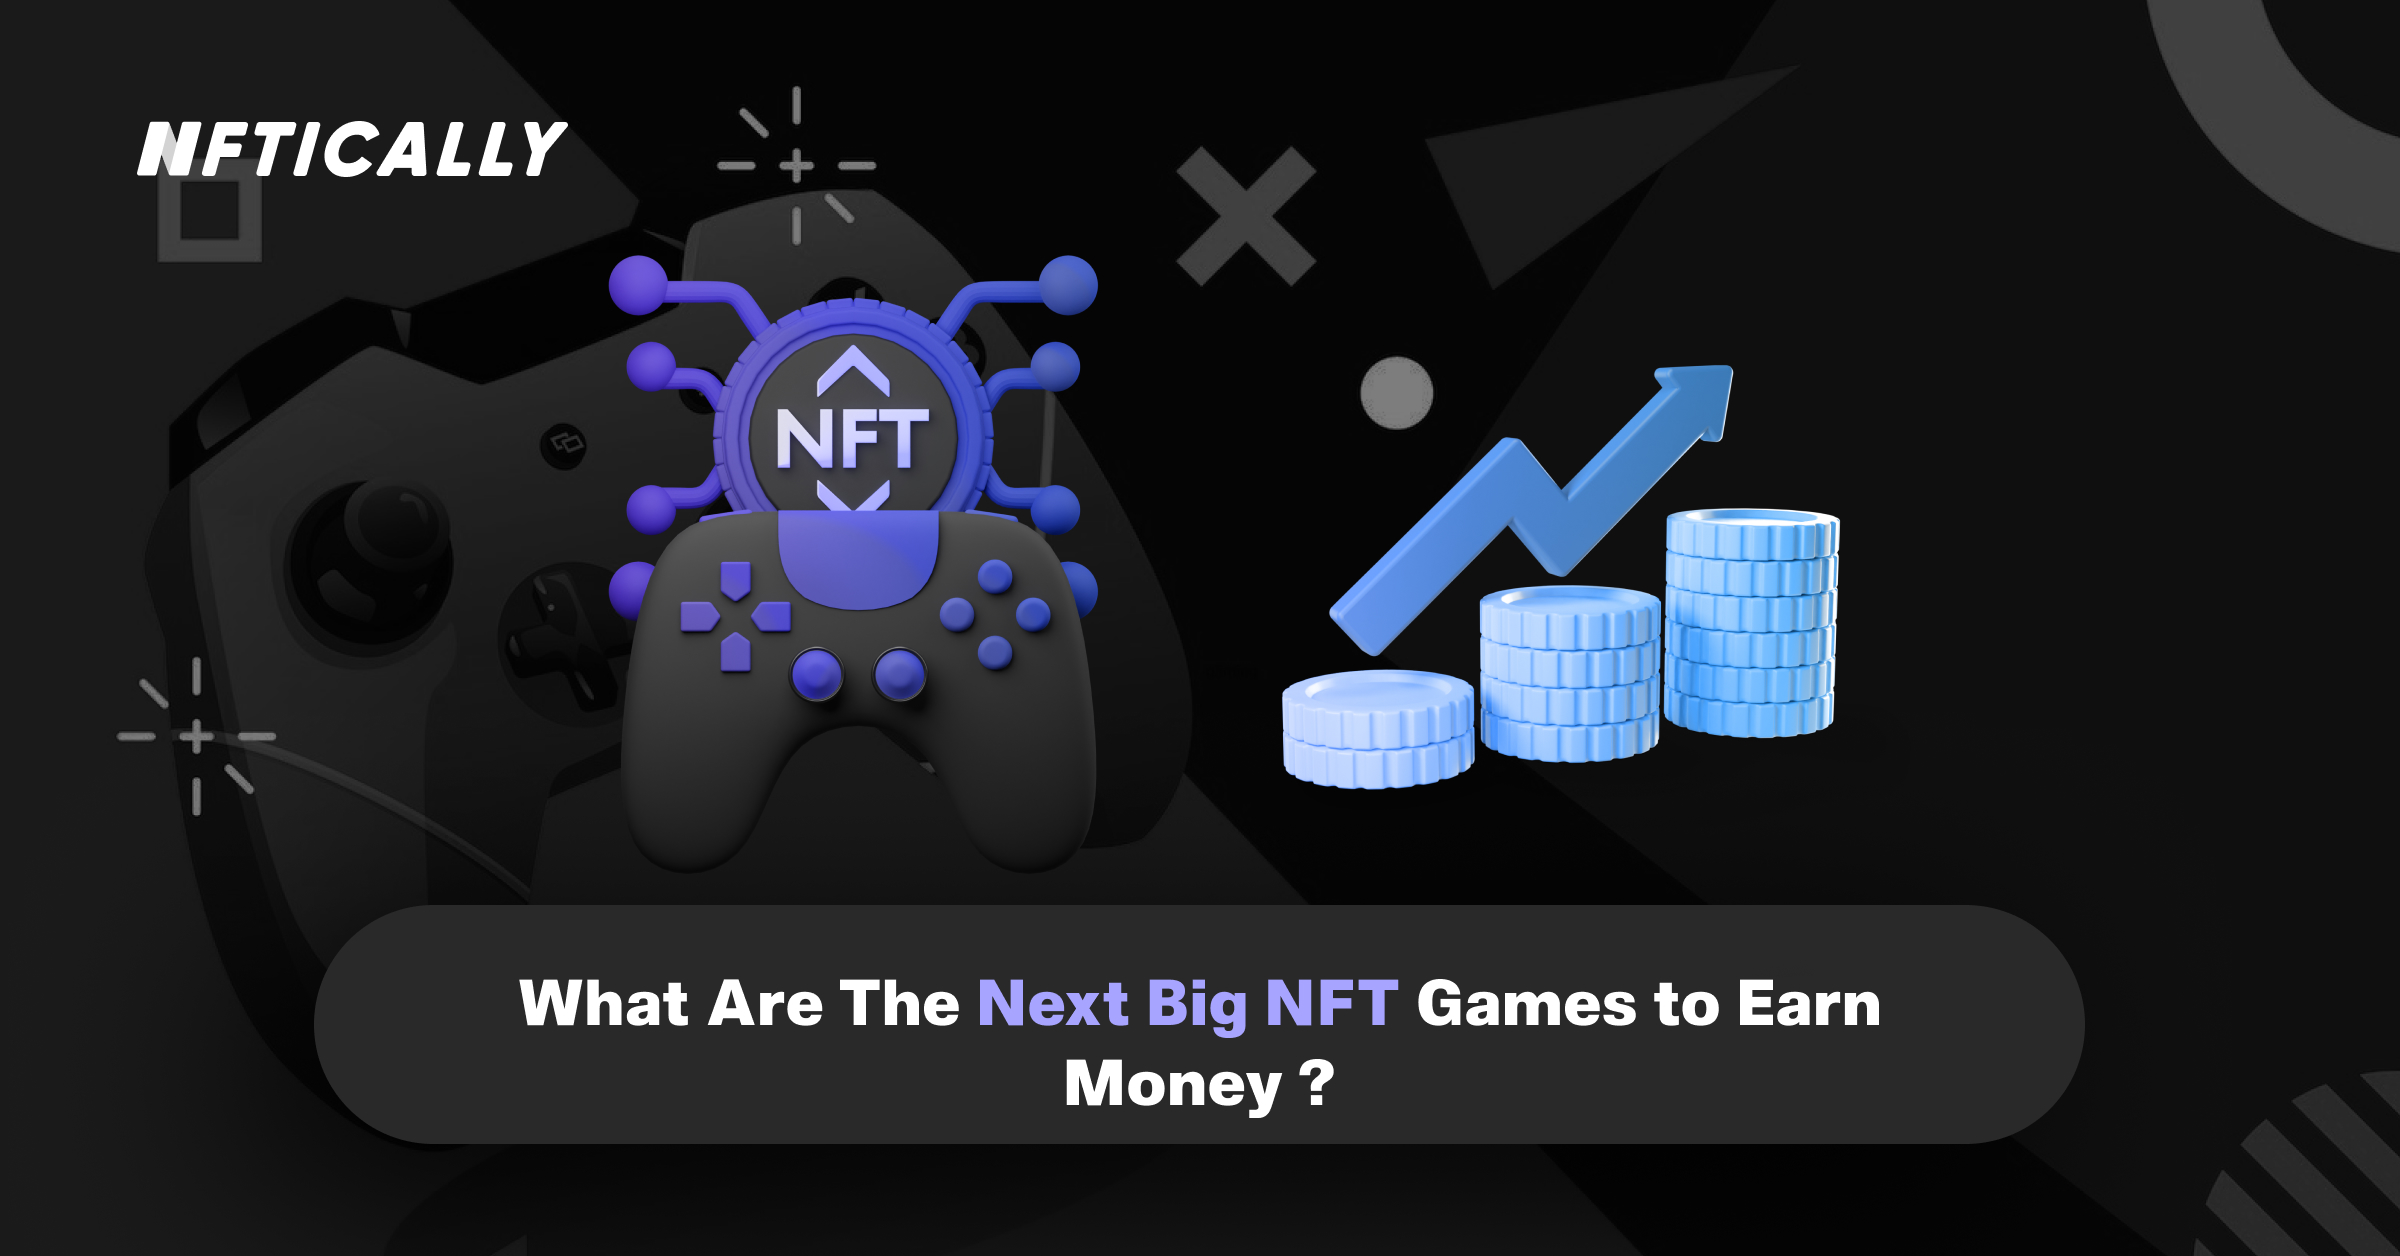 What Are The Next Big NFT Games to Earn Money?